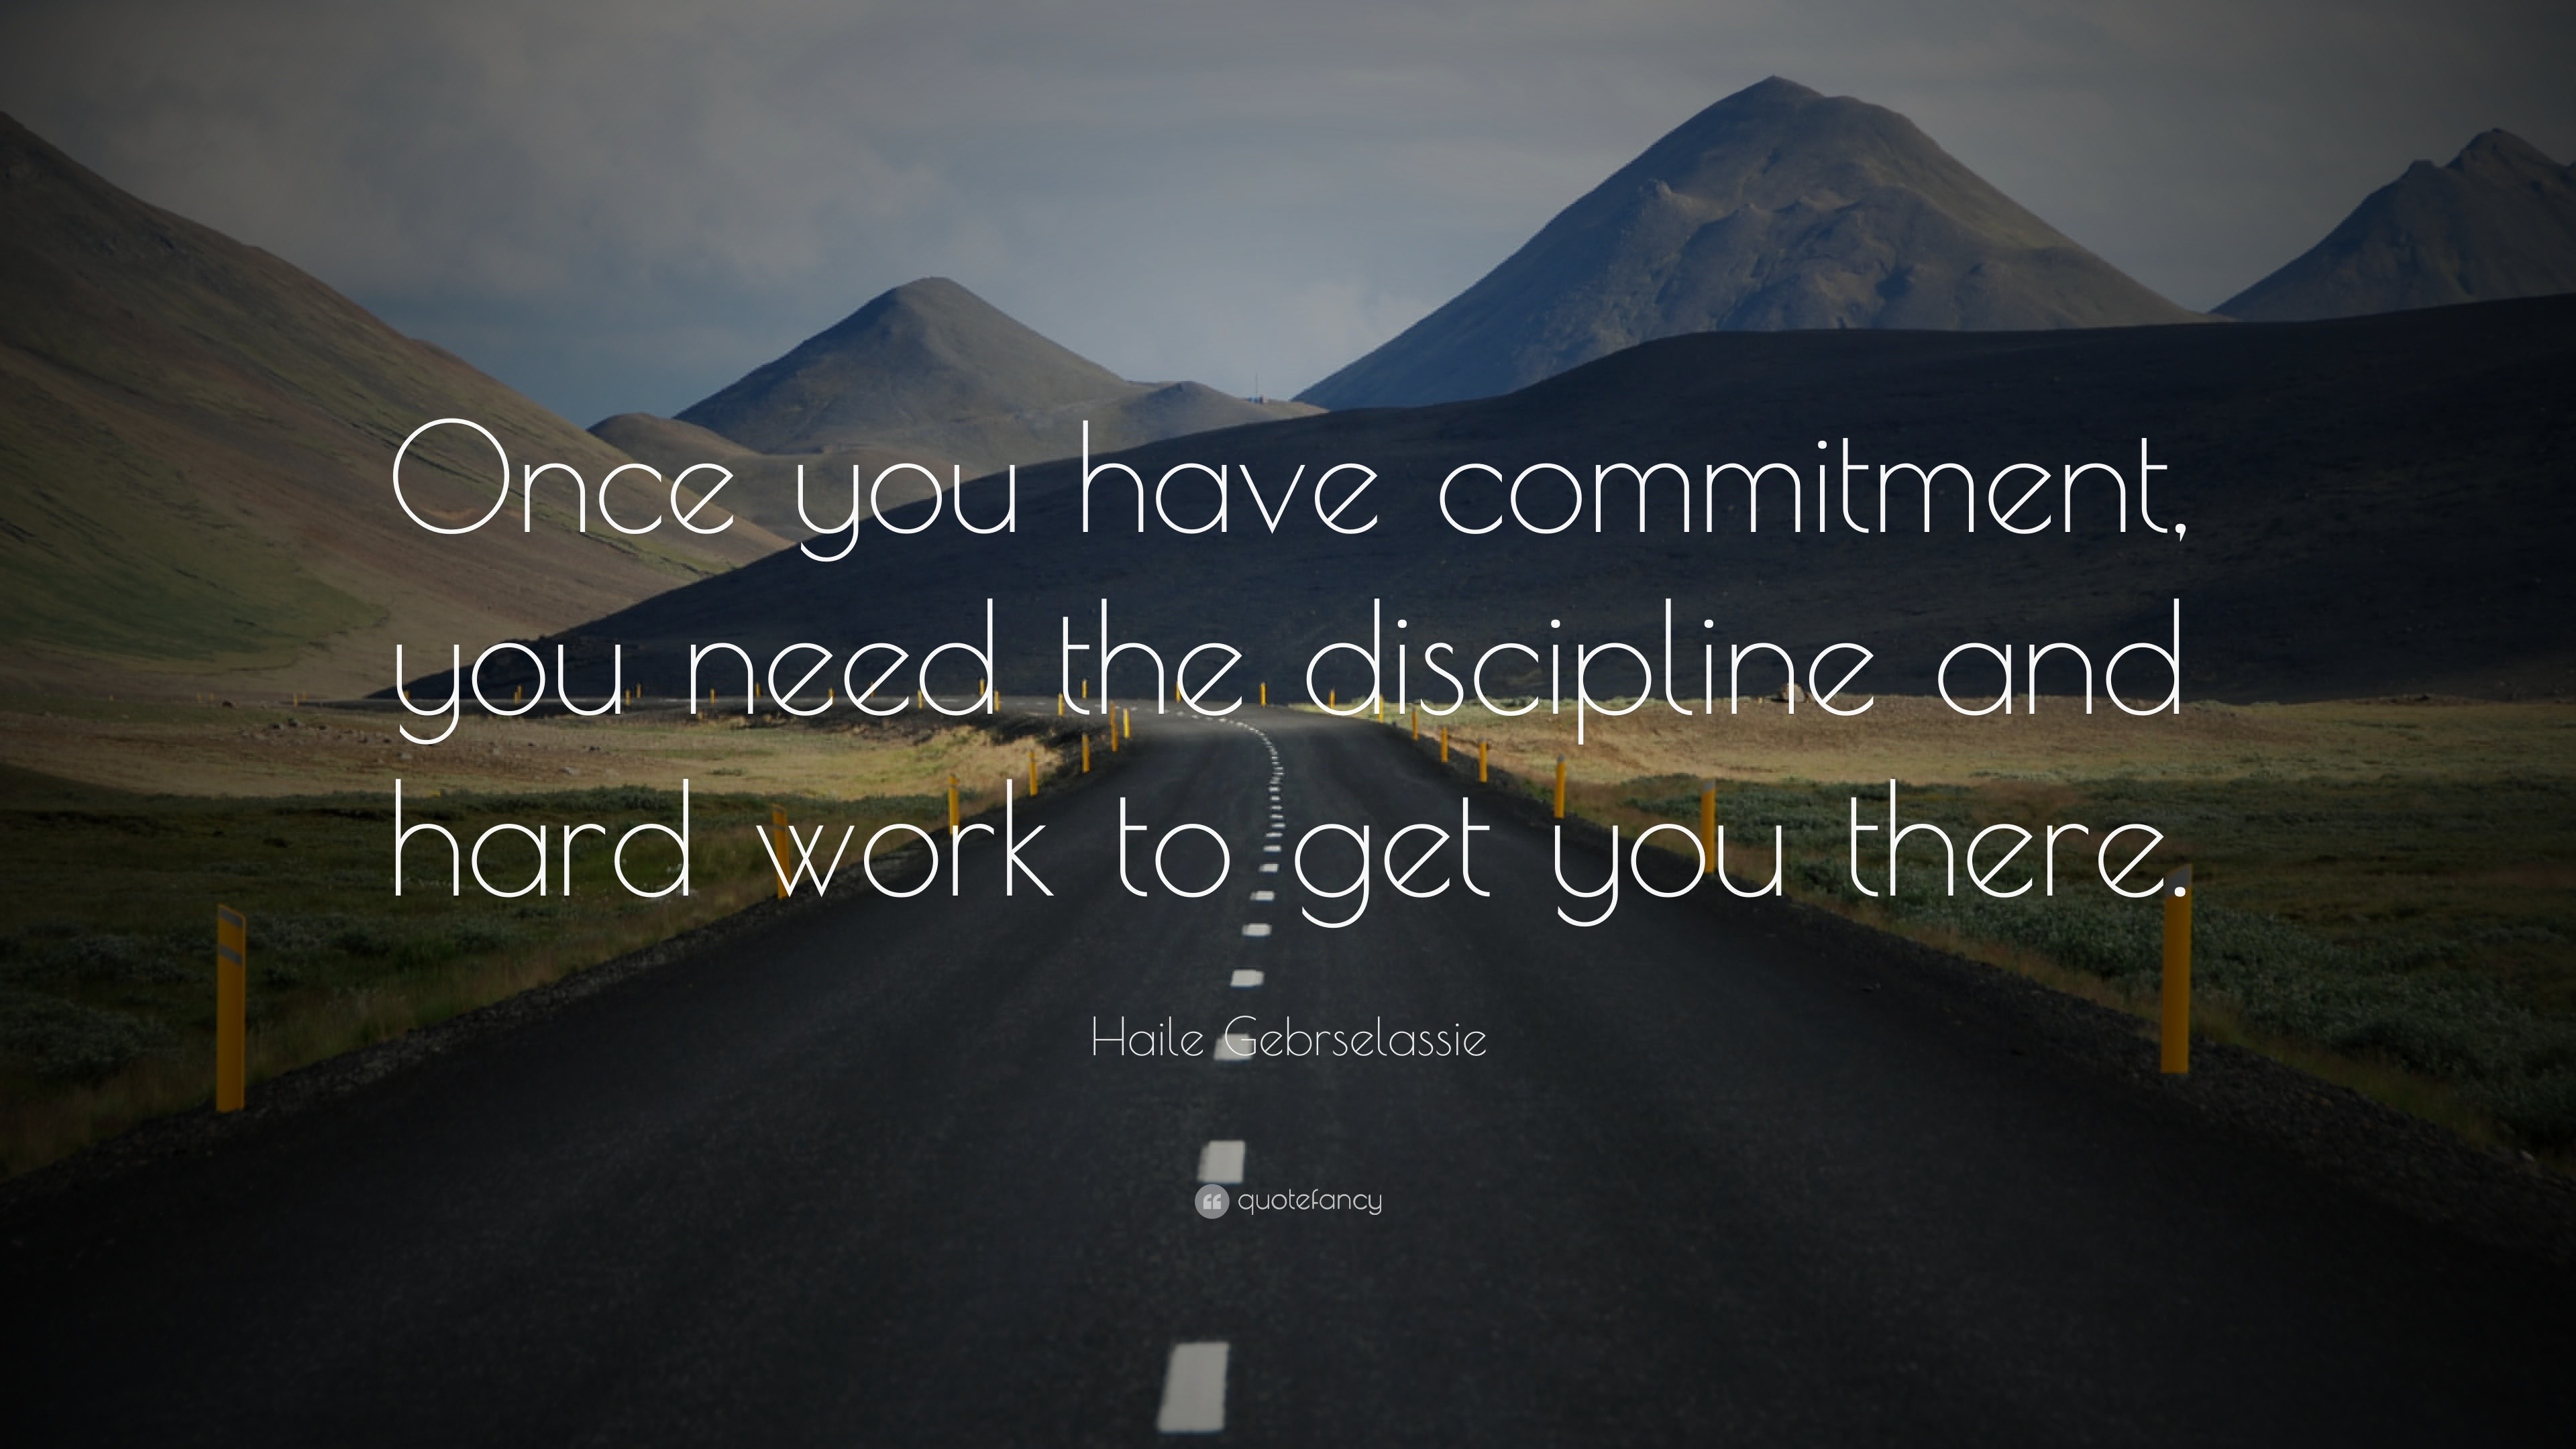 Haile Gebrselassie Quote: “Once you have commitment, you need the